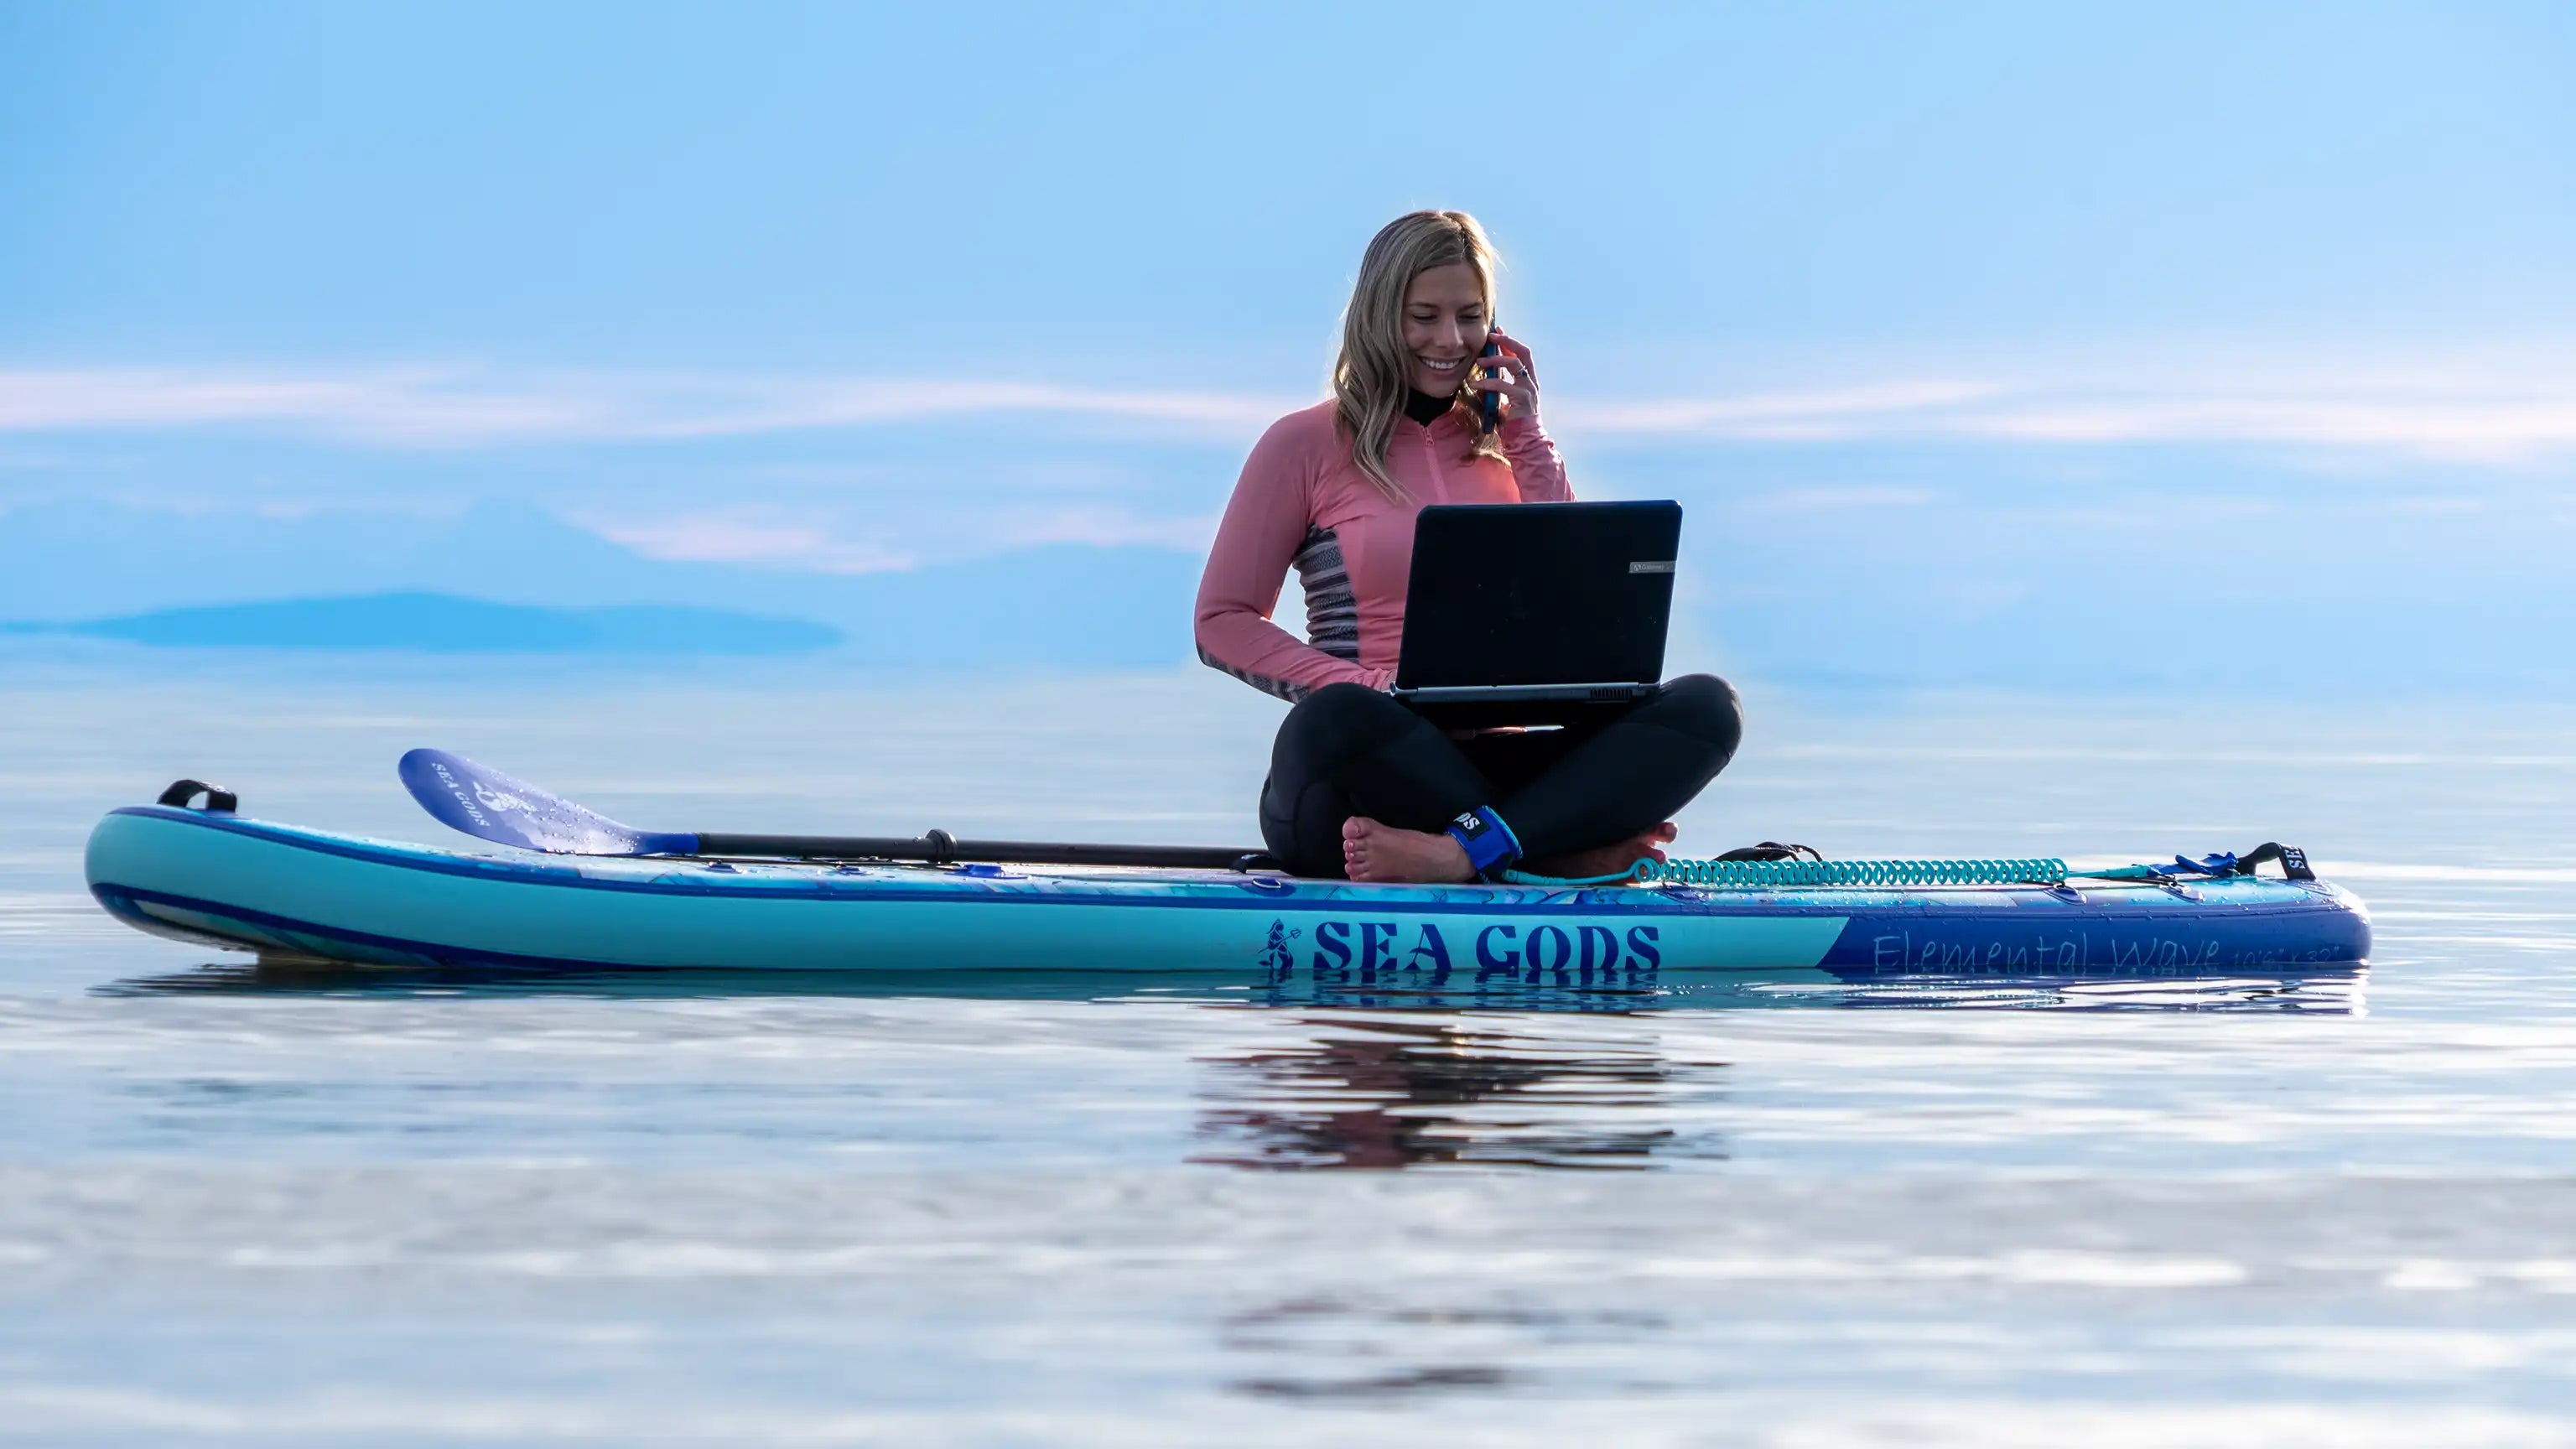 Excellent customer service by Sea Gods stand up paddleboards